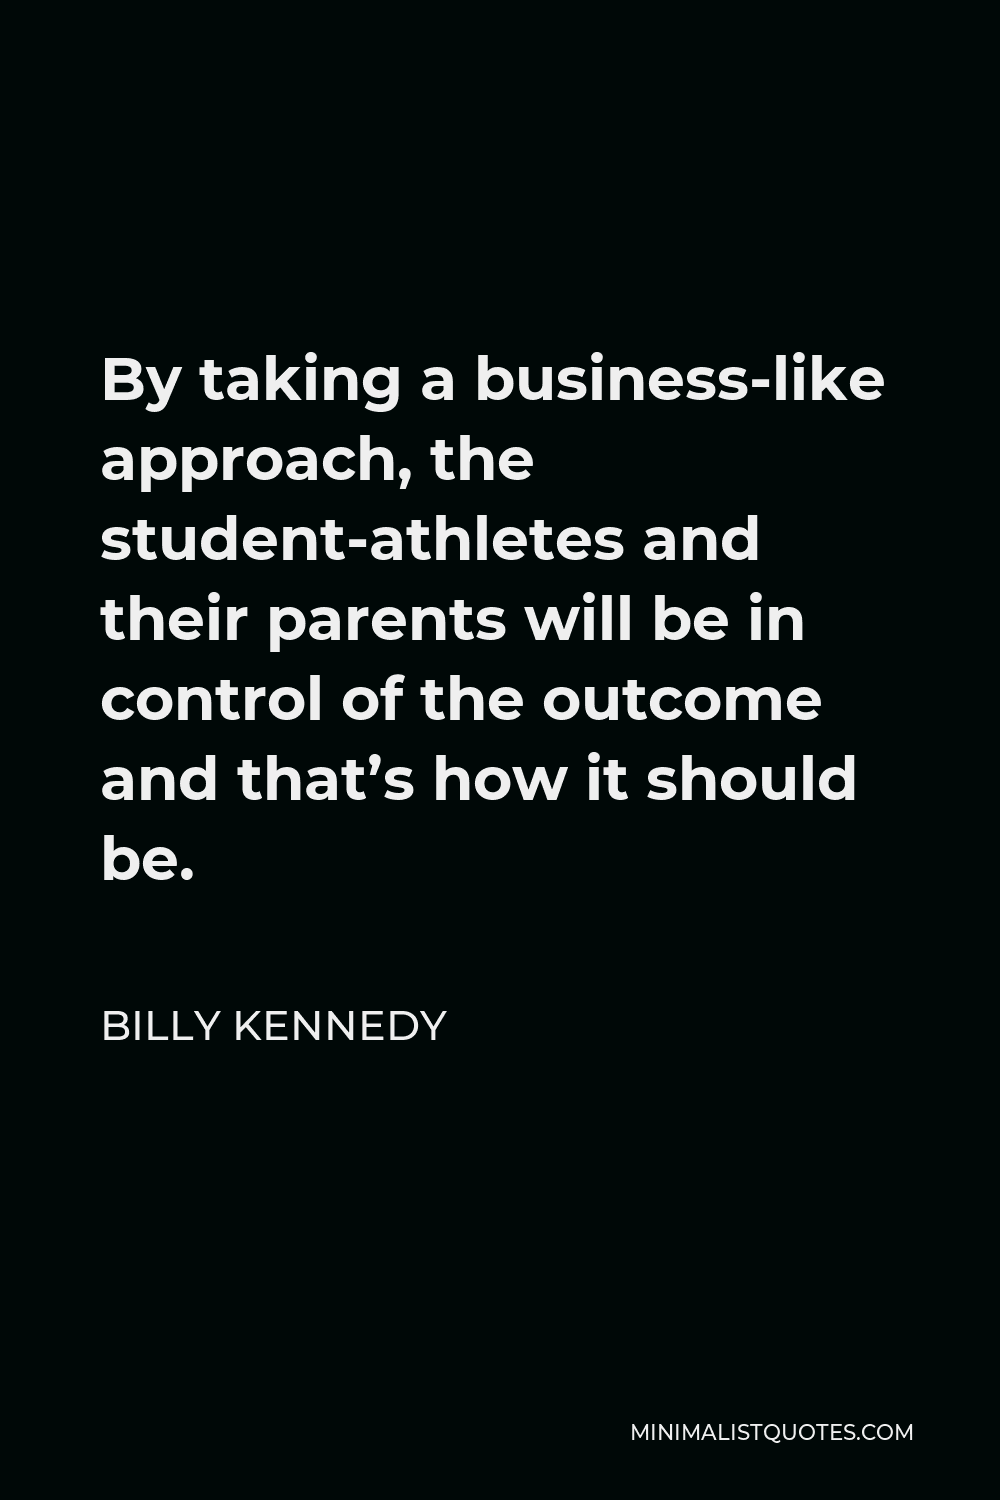 Billy Kennedy Quote - By taking a business-like approach, the student-athletes and their parents will be in control of the outcome and that’s how it should be.